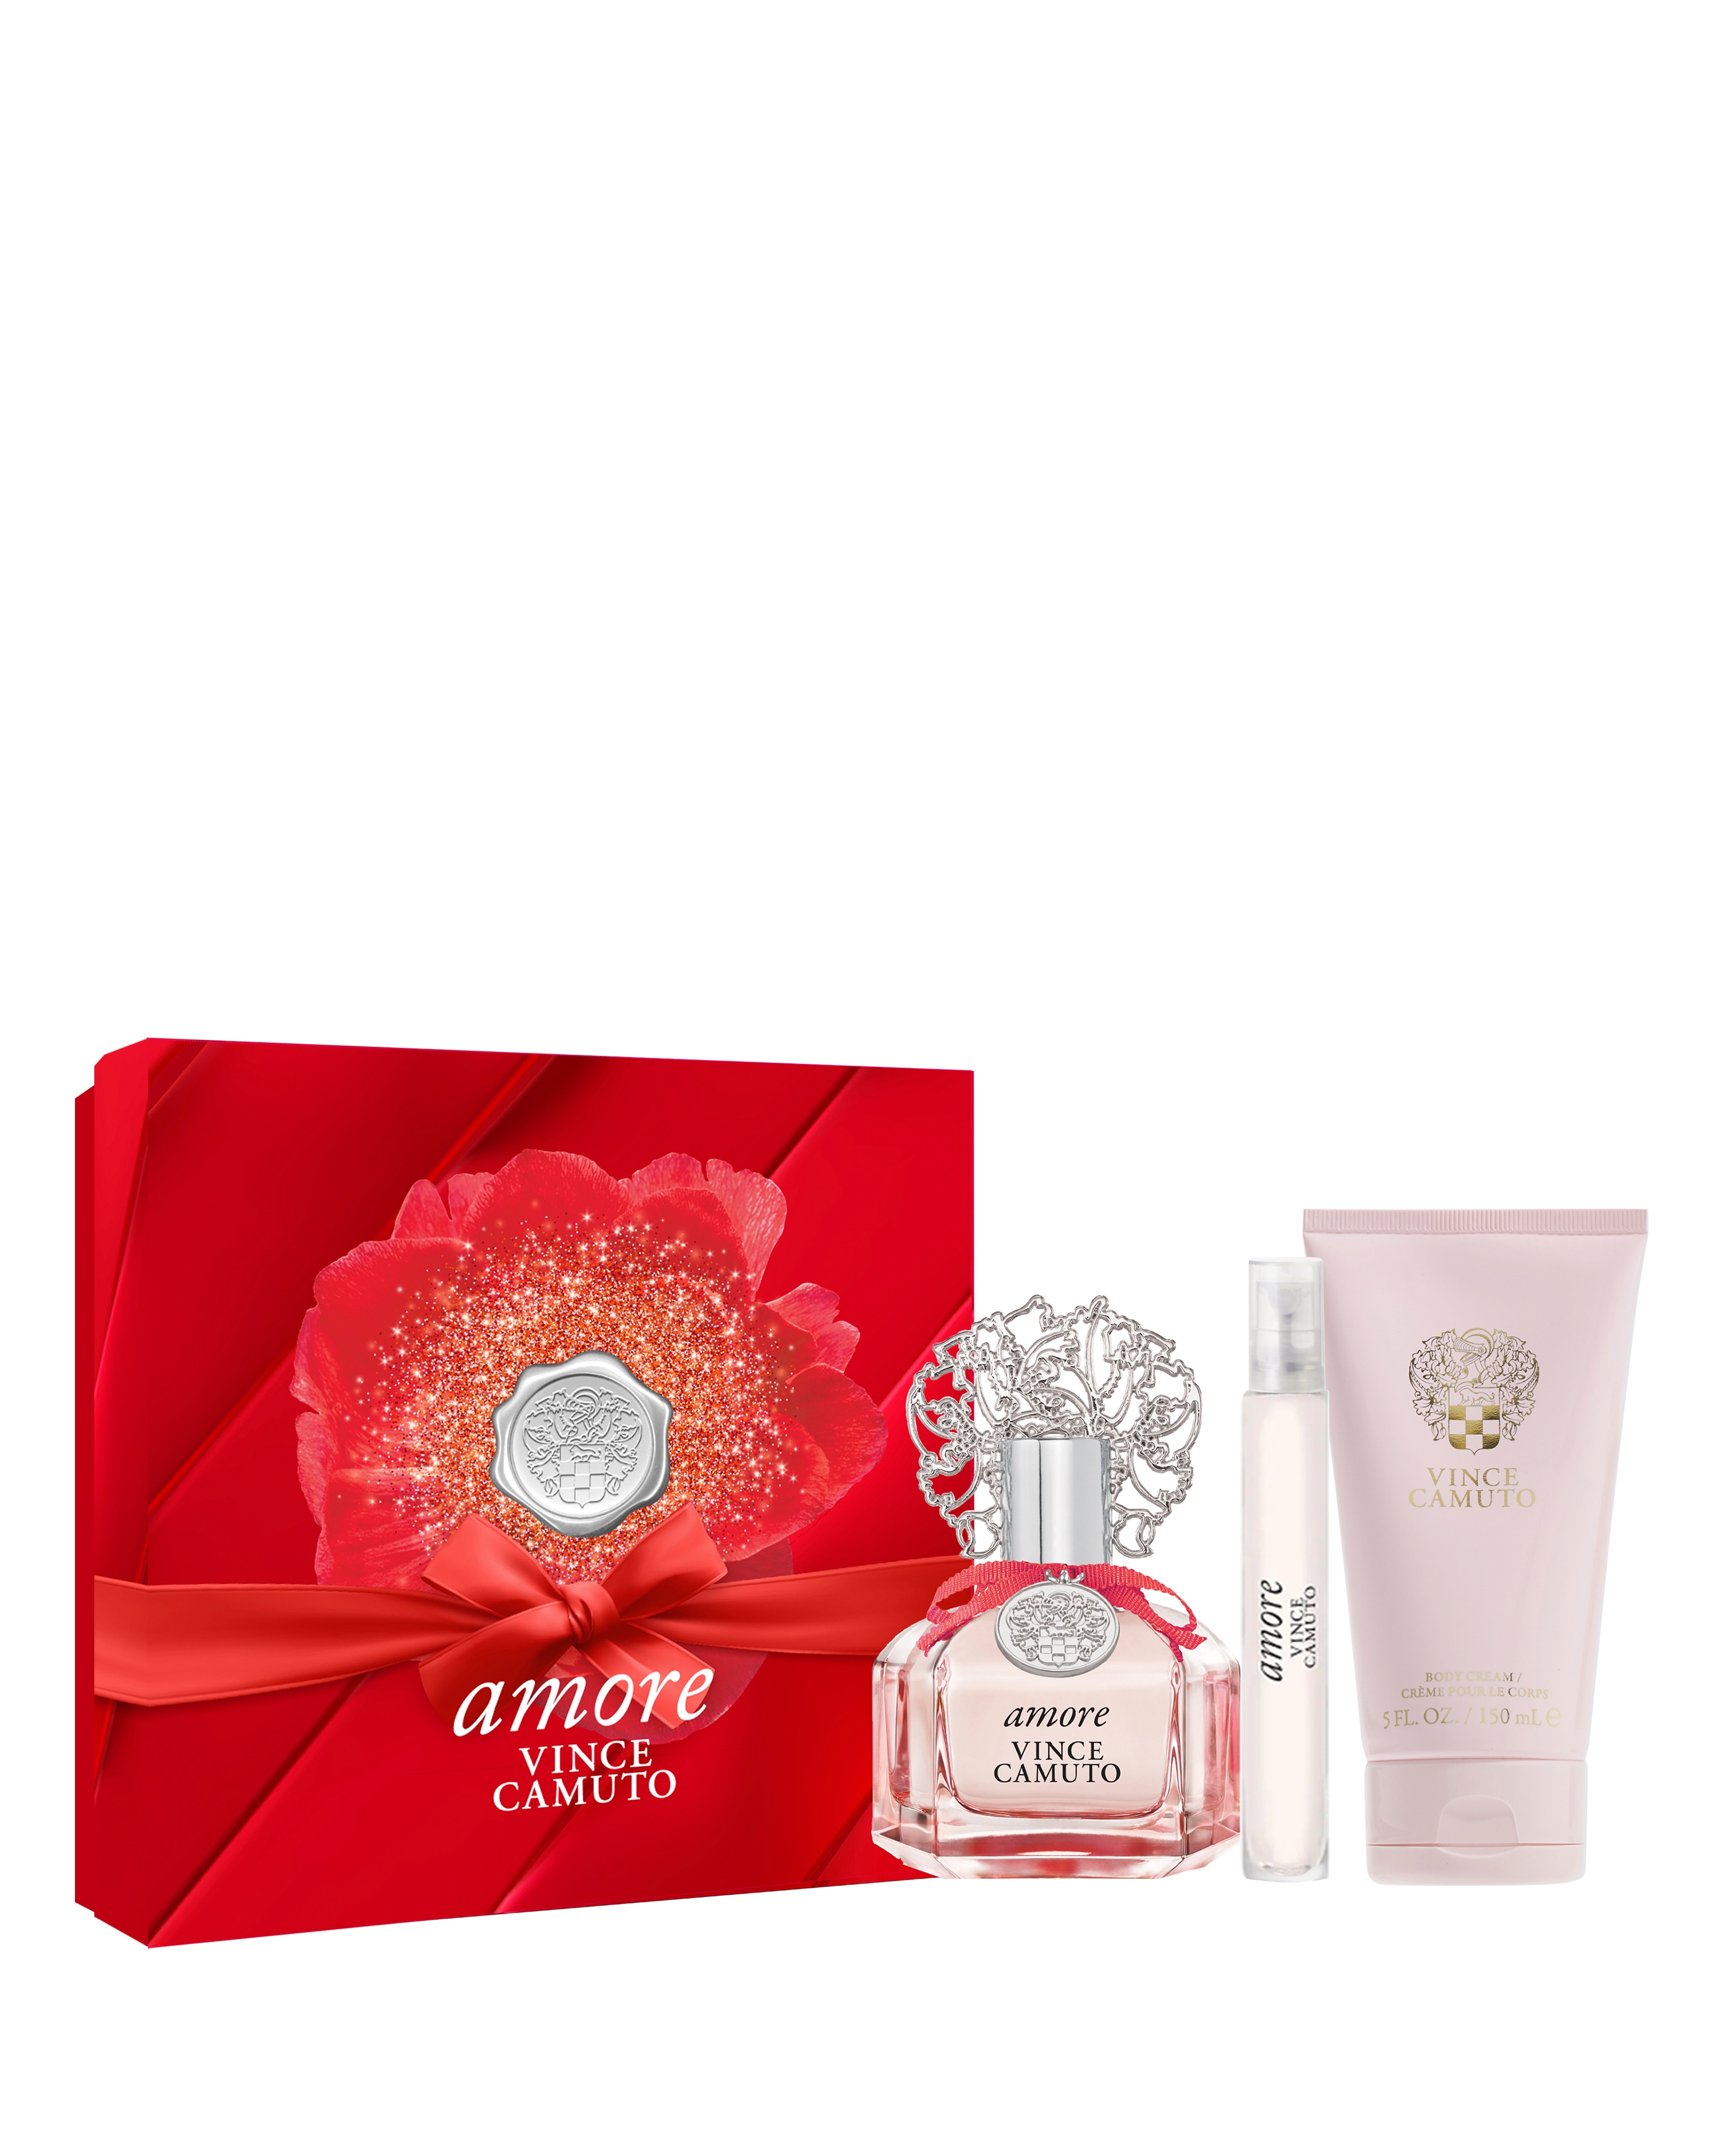 Dropship VINCE CAMUTO AMORE By Vince Camuto EAU DE PARFUM 0.25 OZ MINI  (UNBOXED) to Sell Online at a Lower Price